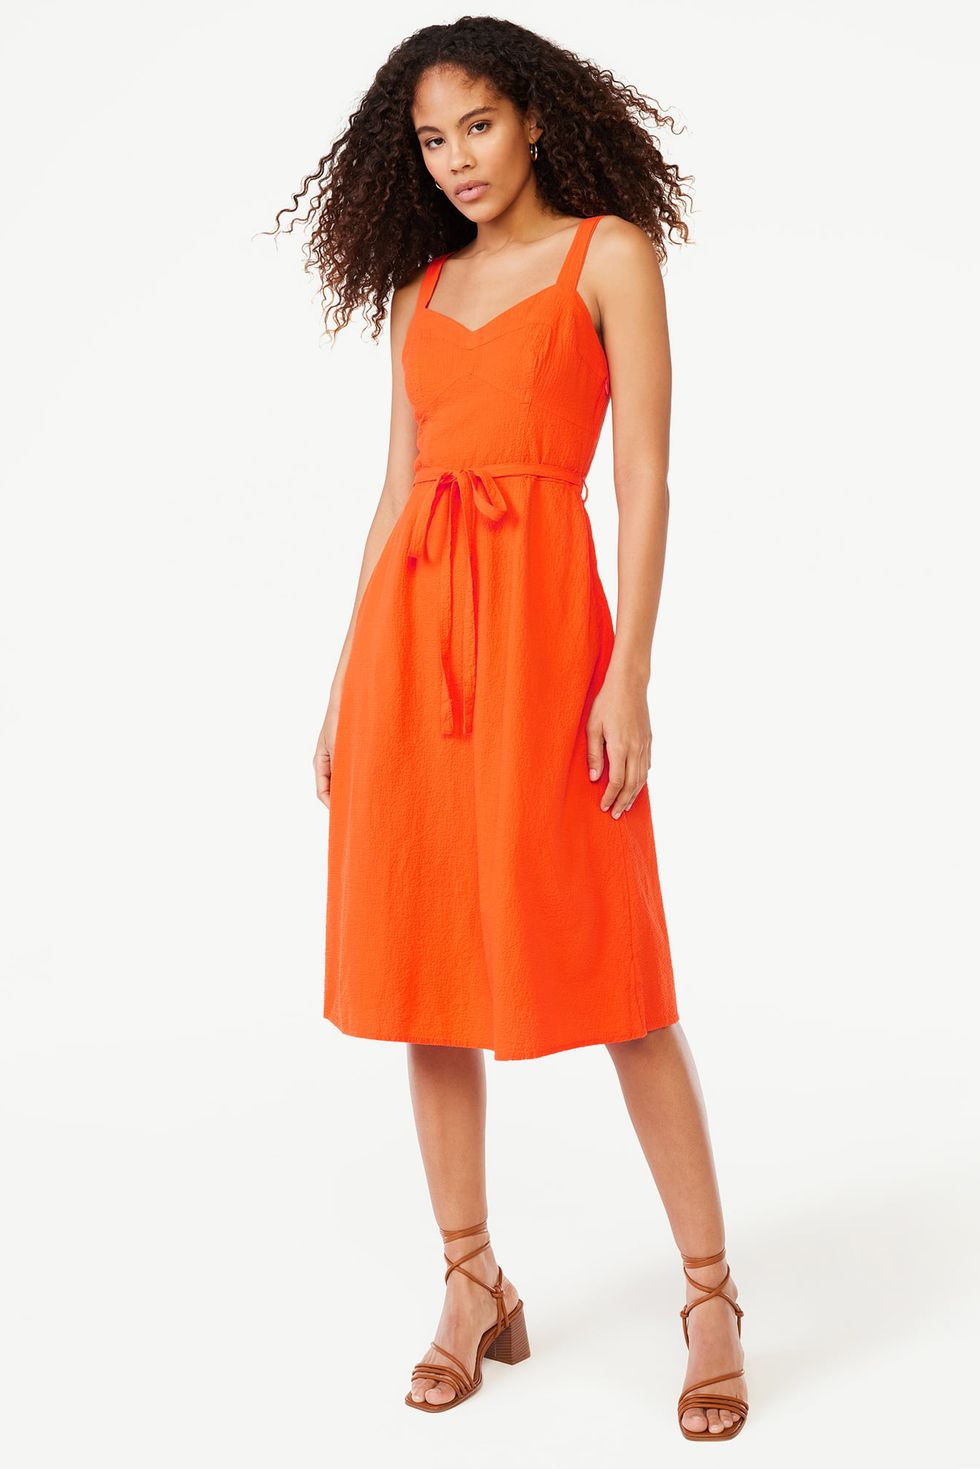 Shop the Best Dresses from the Walmart Free Assembly Fall 2021 Line